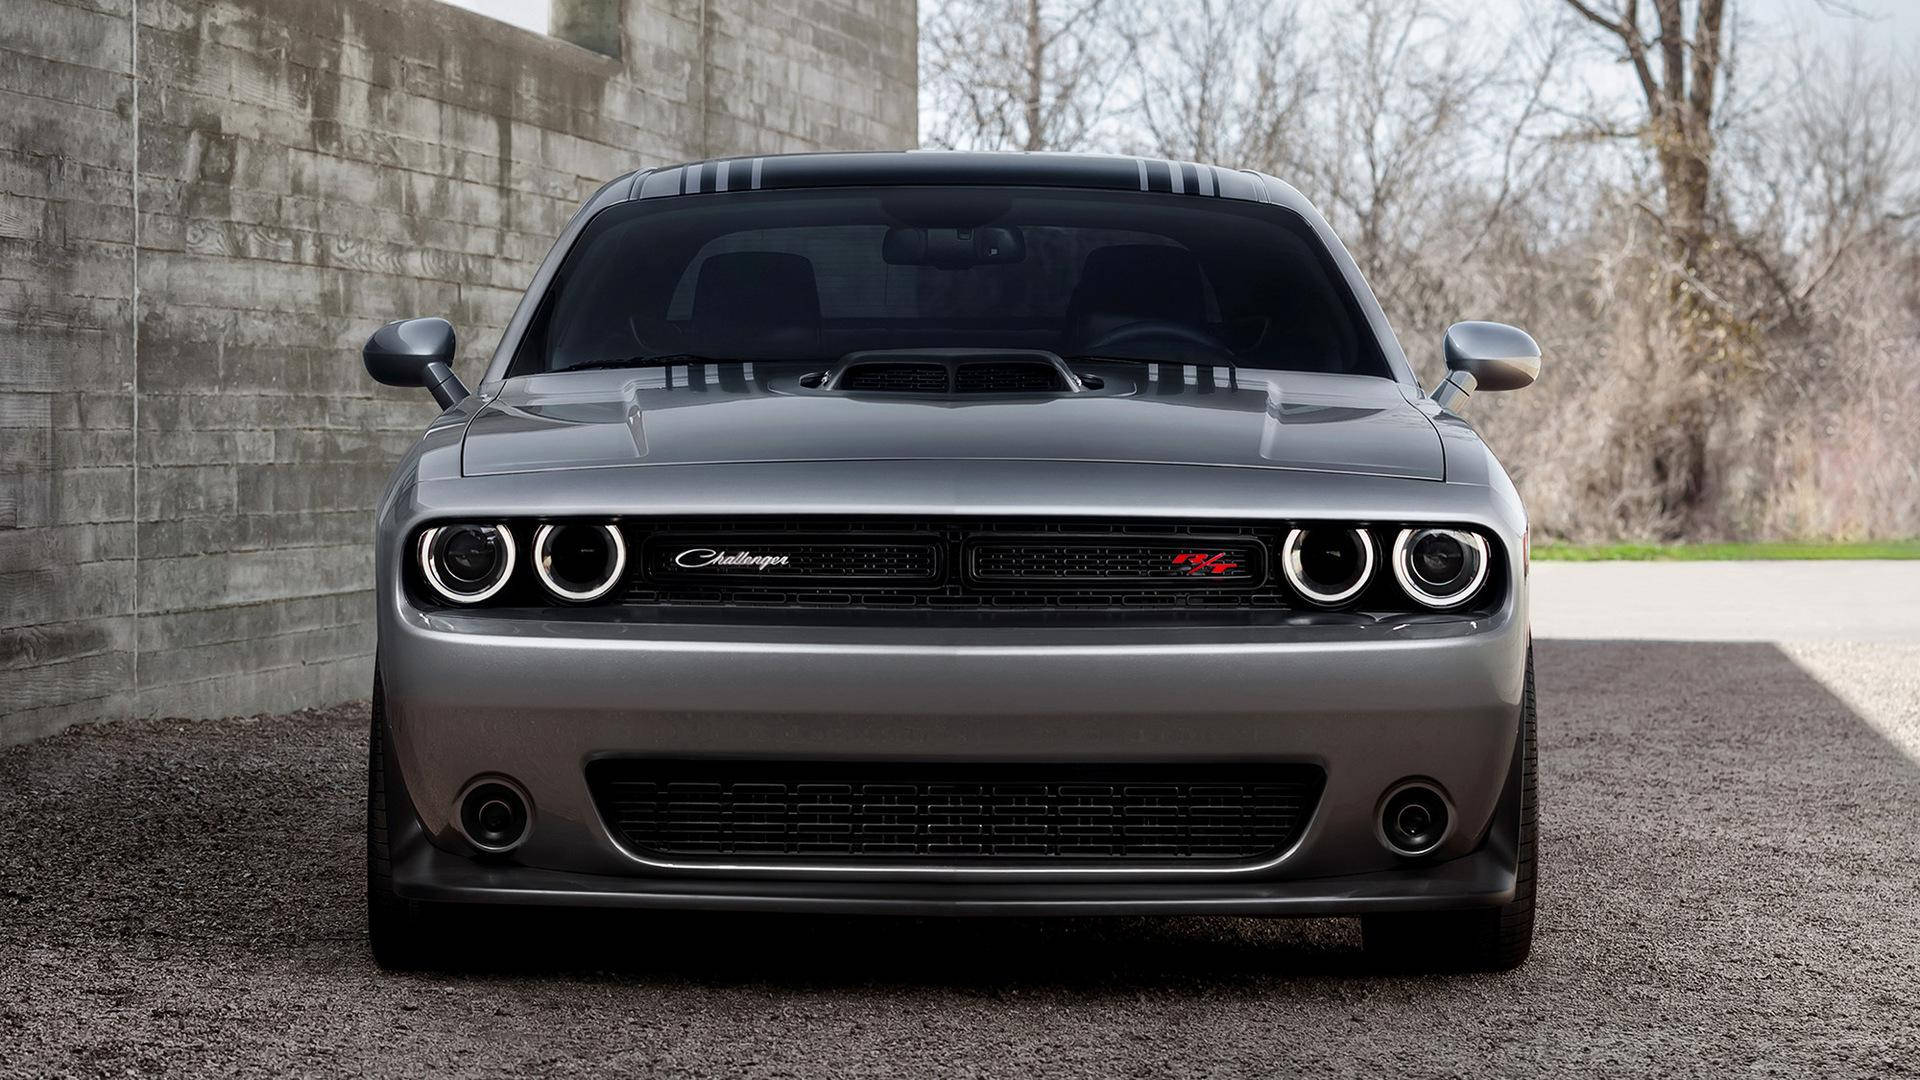 Dodge Challenger In Silver Paint Wallpaper